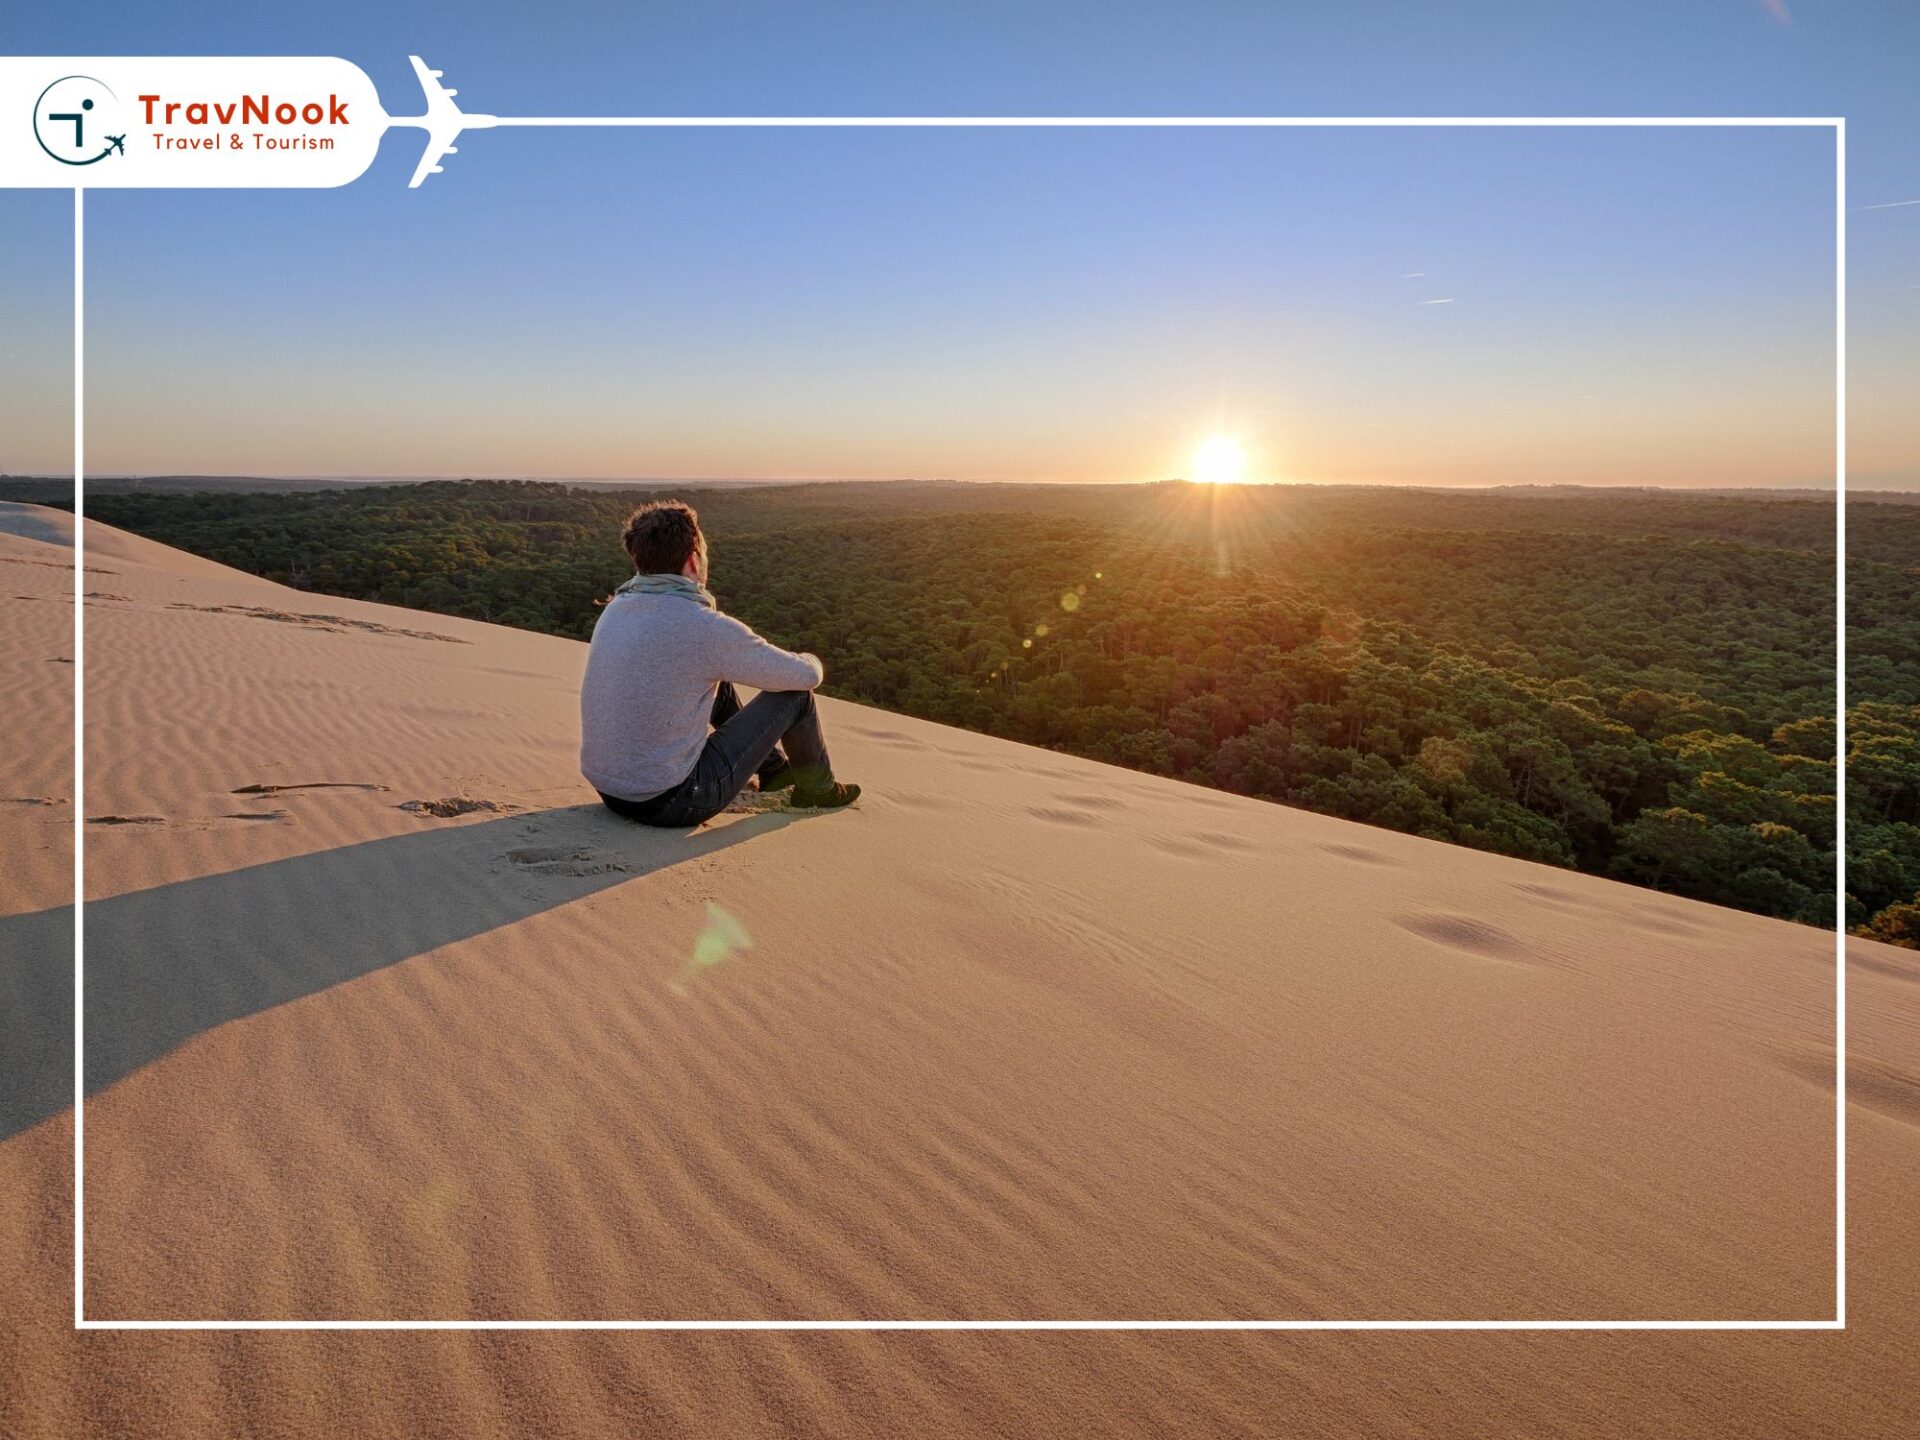 Famous Landmarks in France to Visit From UAE - Dune of Pilat, Arcachon